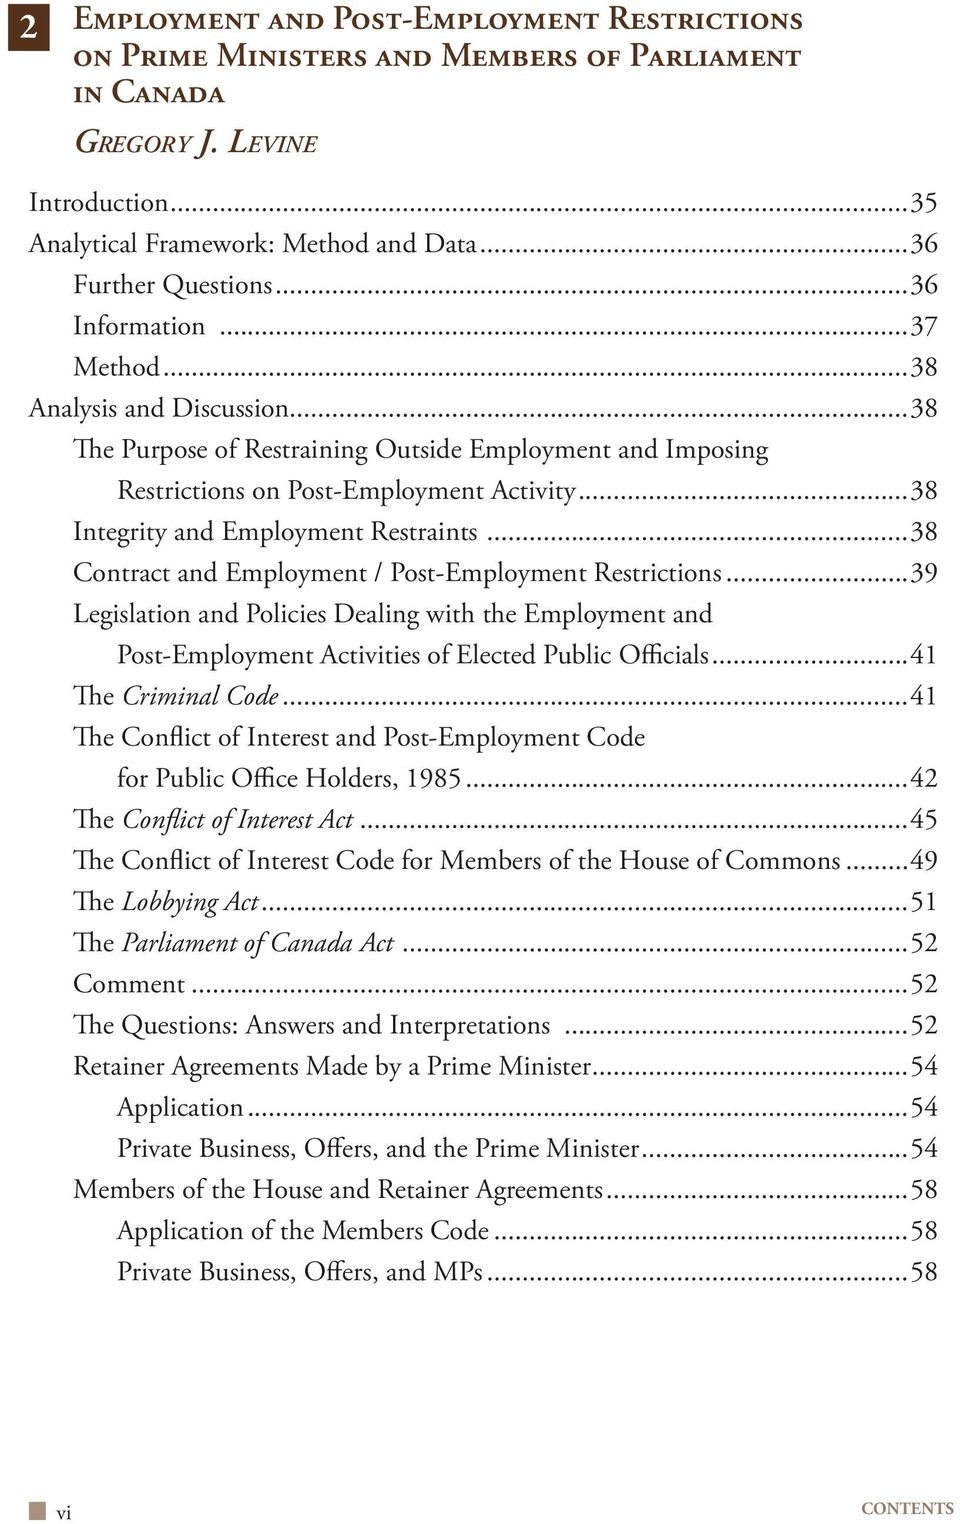 ..38 Integrity and Employment Restraints...38 Contract and Employment / Post-Employment Restrictions.